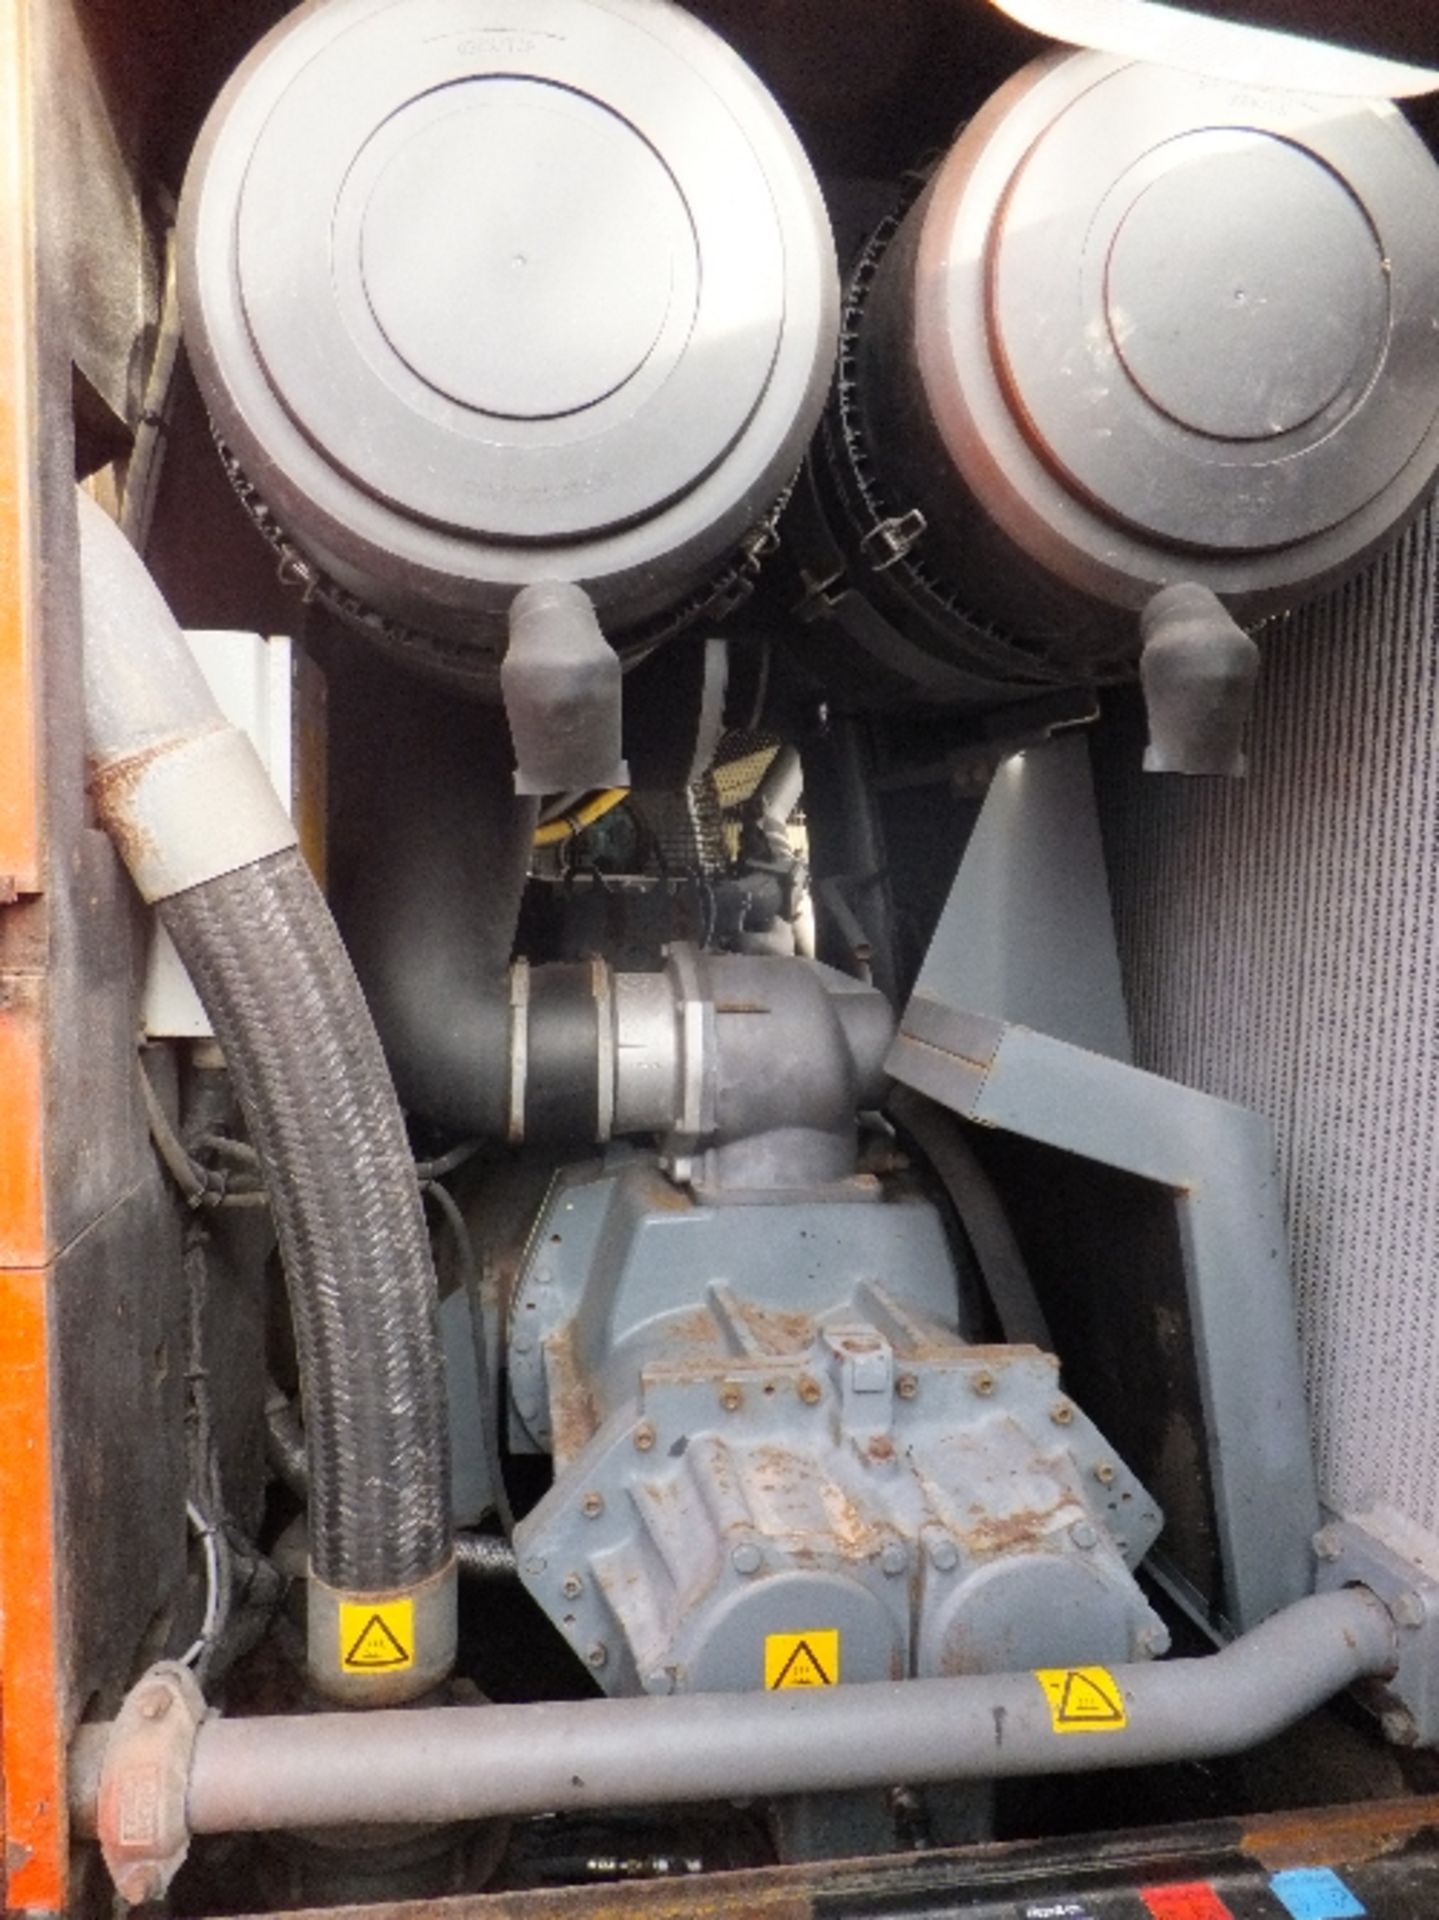 Atlas Copco XAHS 416 compressor (2005) Turns over, common rail fuel issue - Image 6 of 11